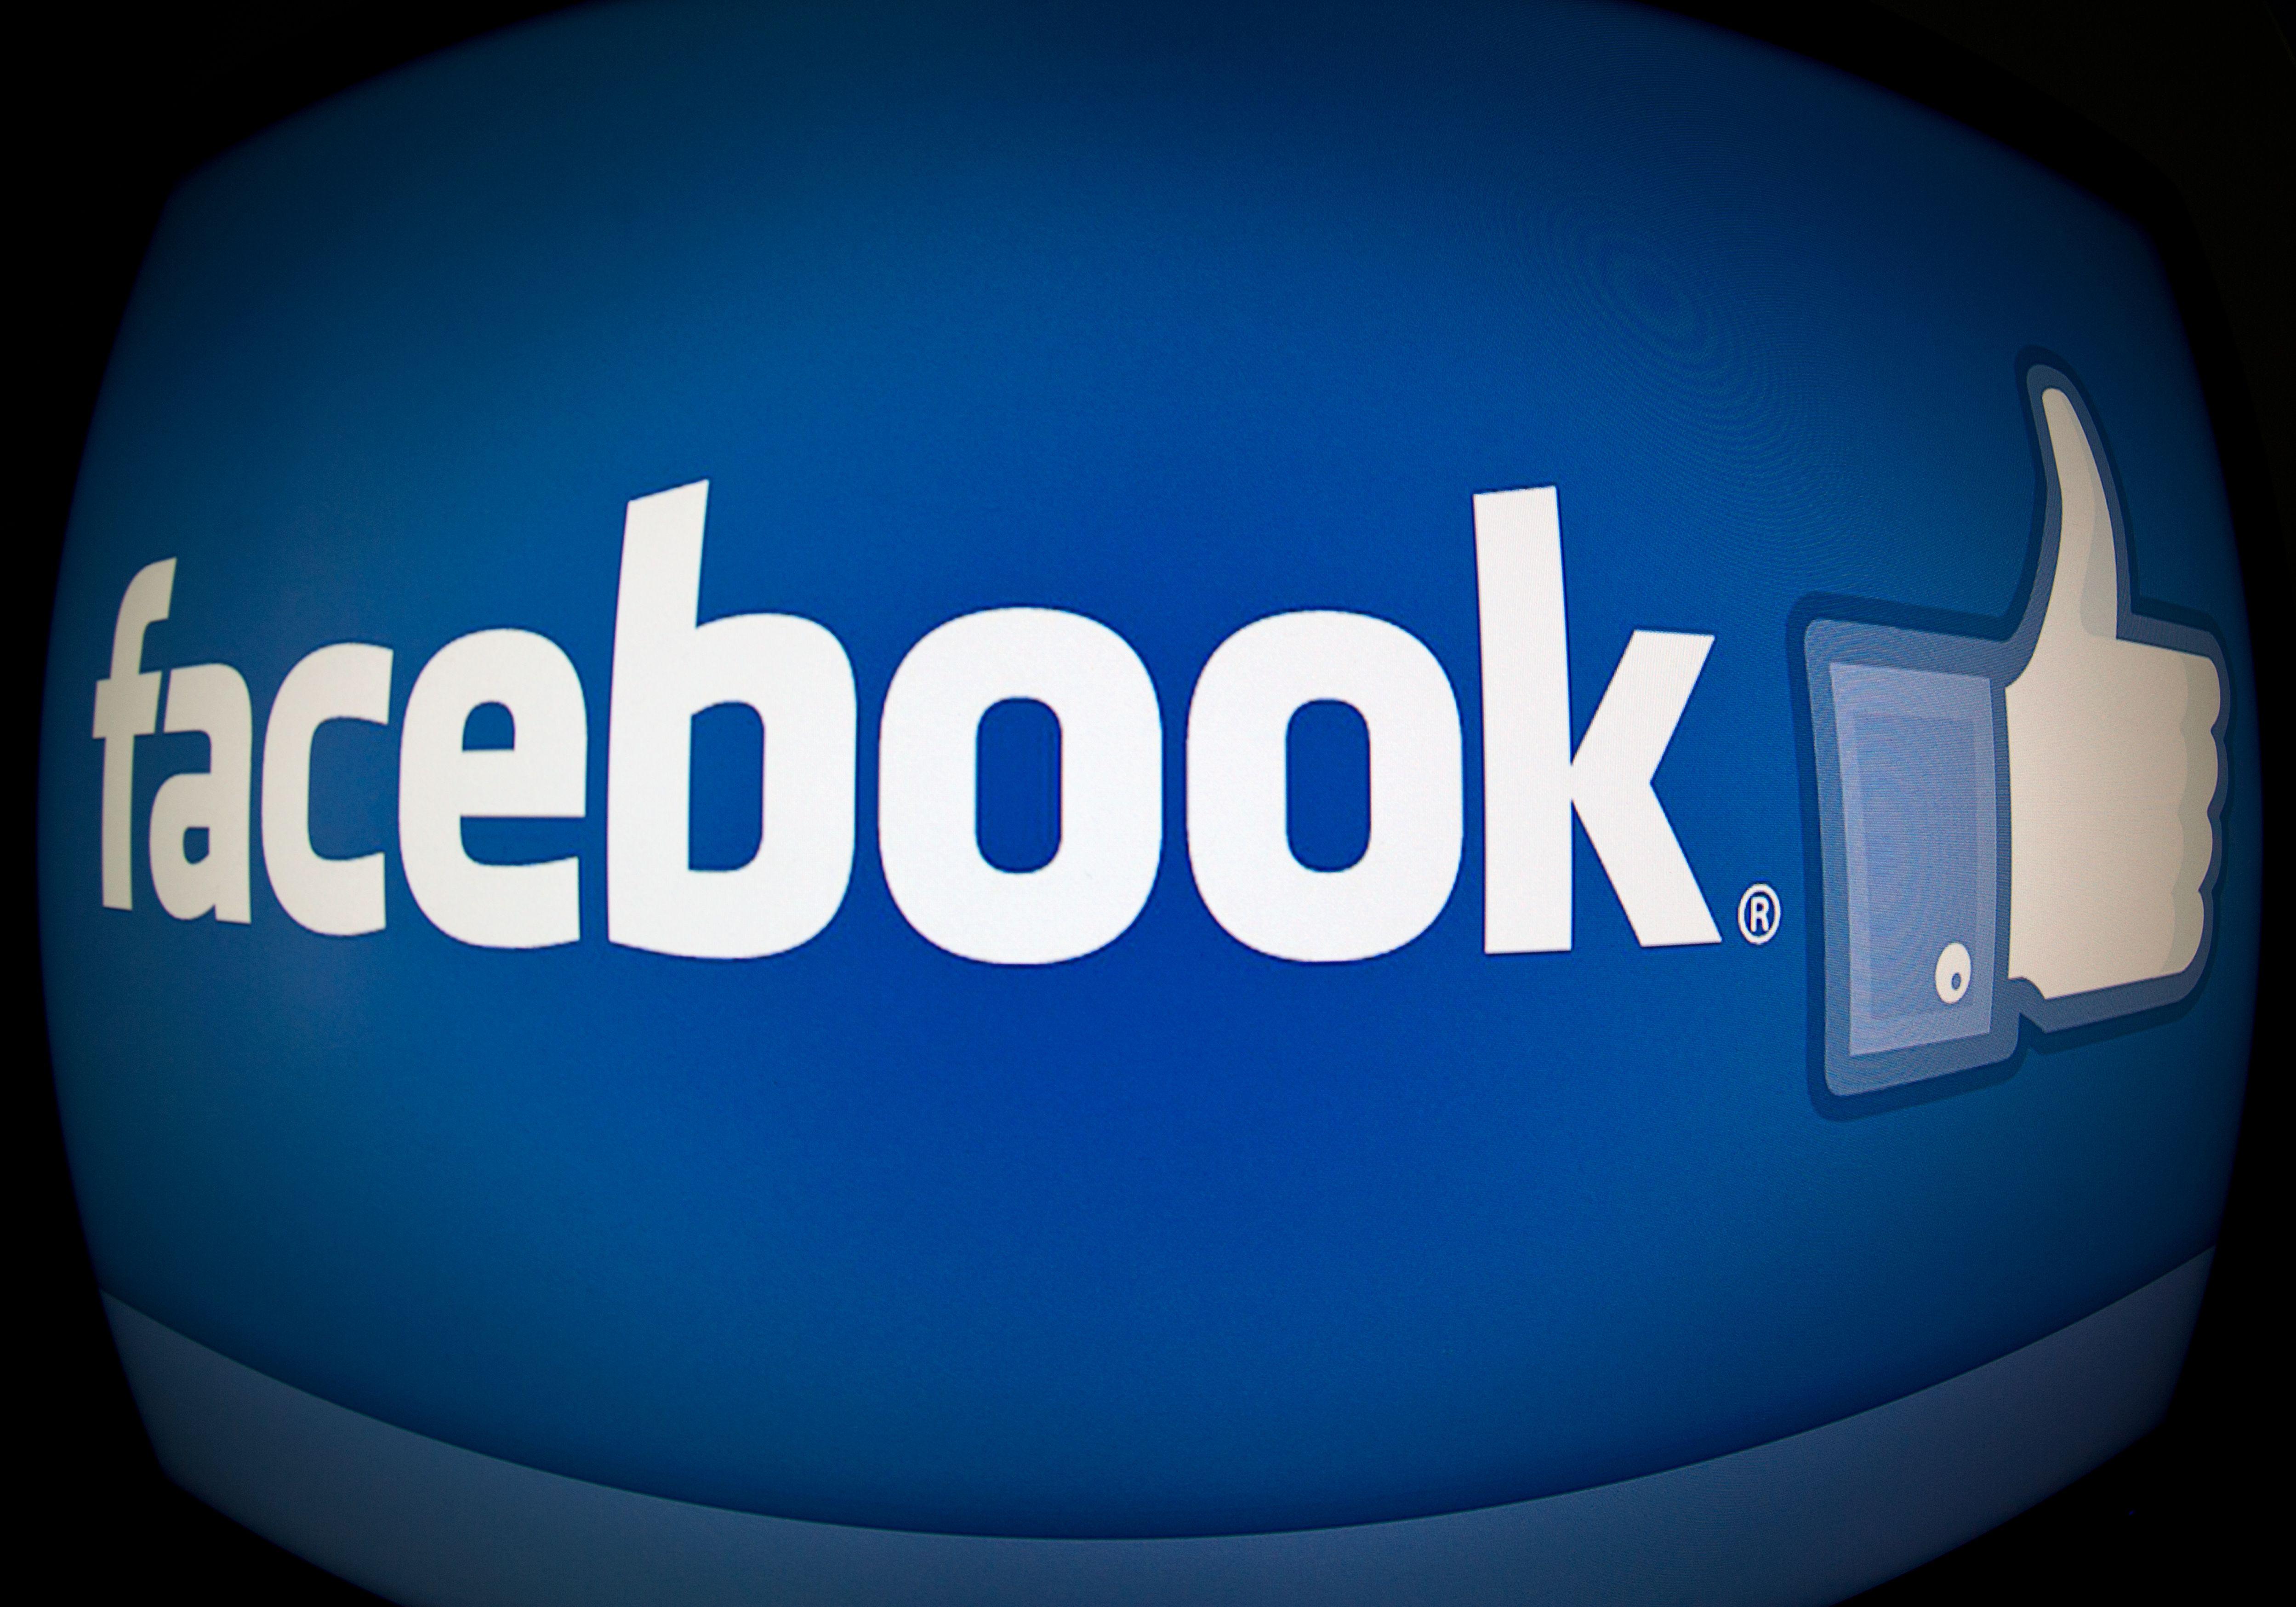 Looking for Facebook Logo - Facebook expands advertising growth to emerging markets: India ...